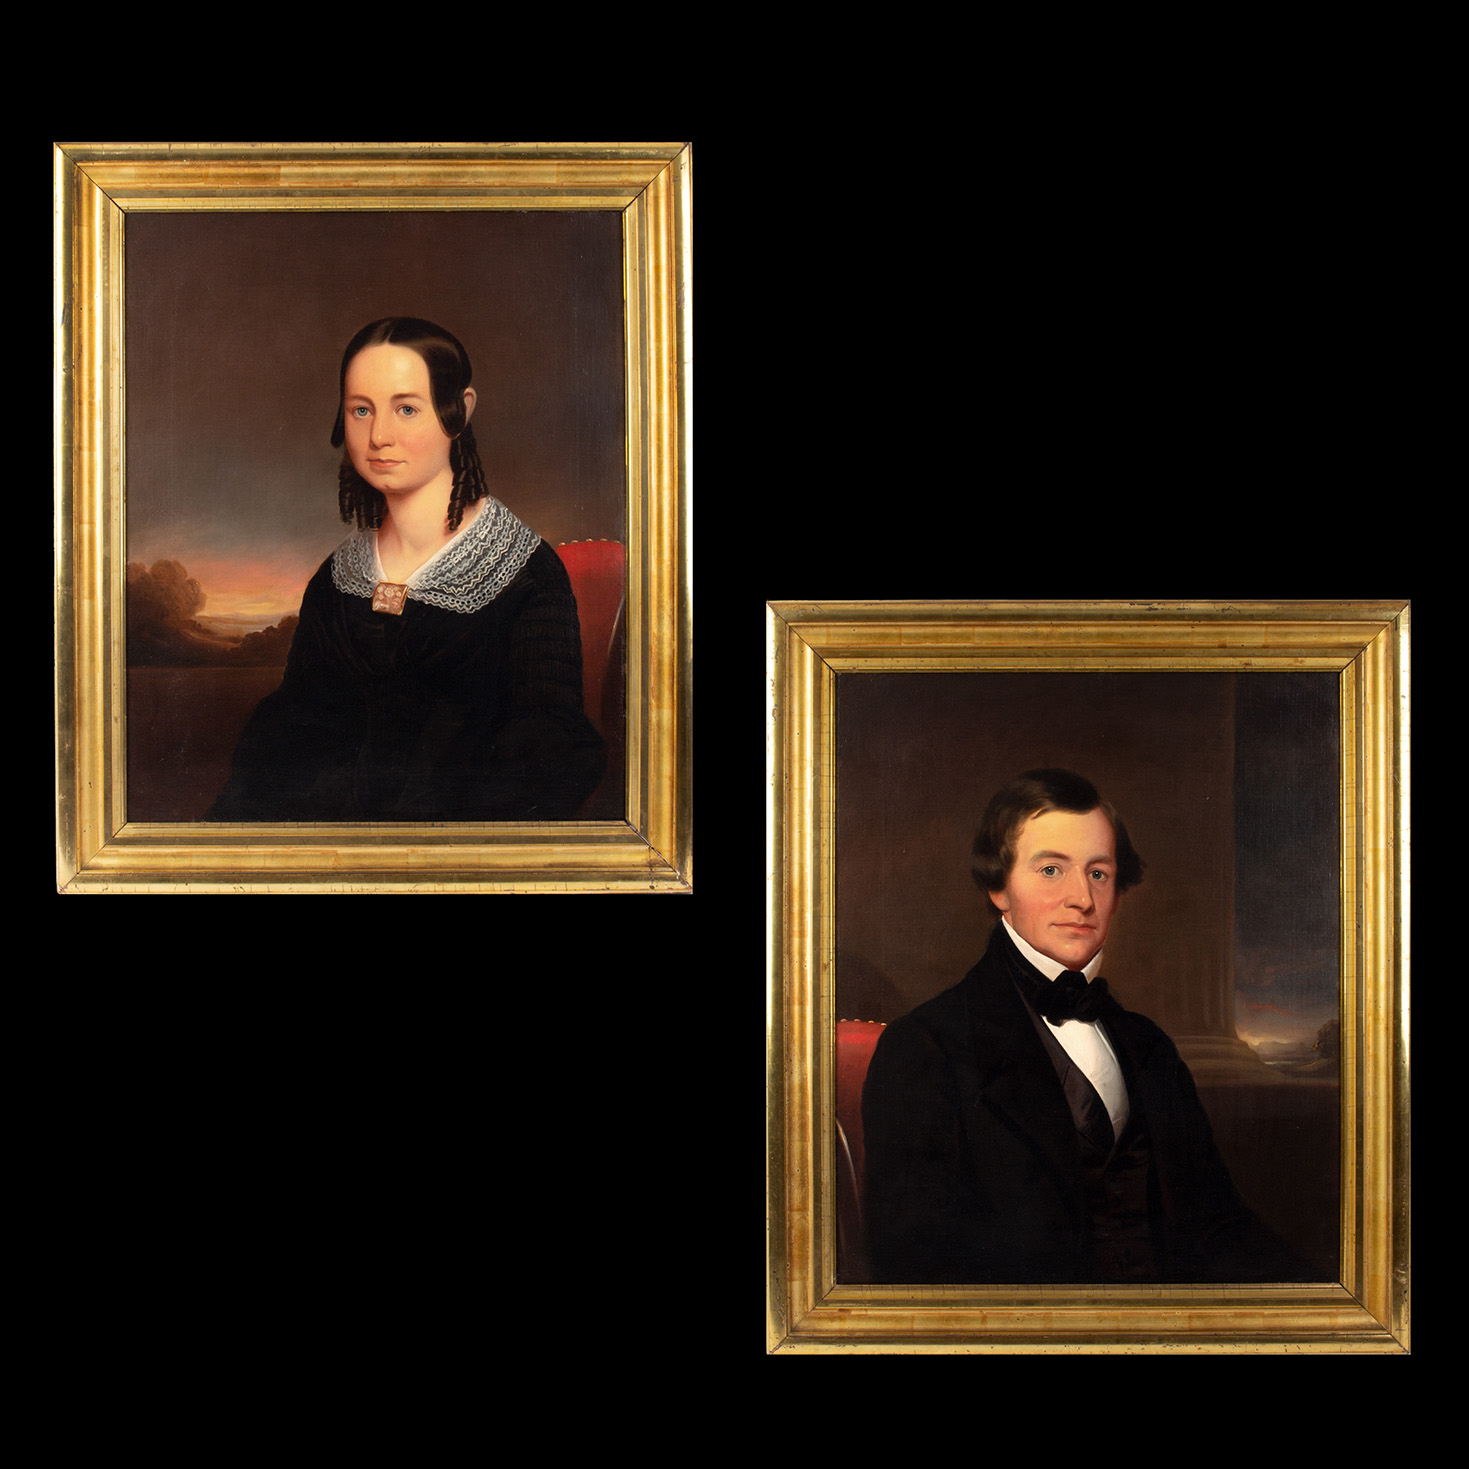 Robert Street, Portraits of Man and Woman, An Attractive Couple, Image 1